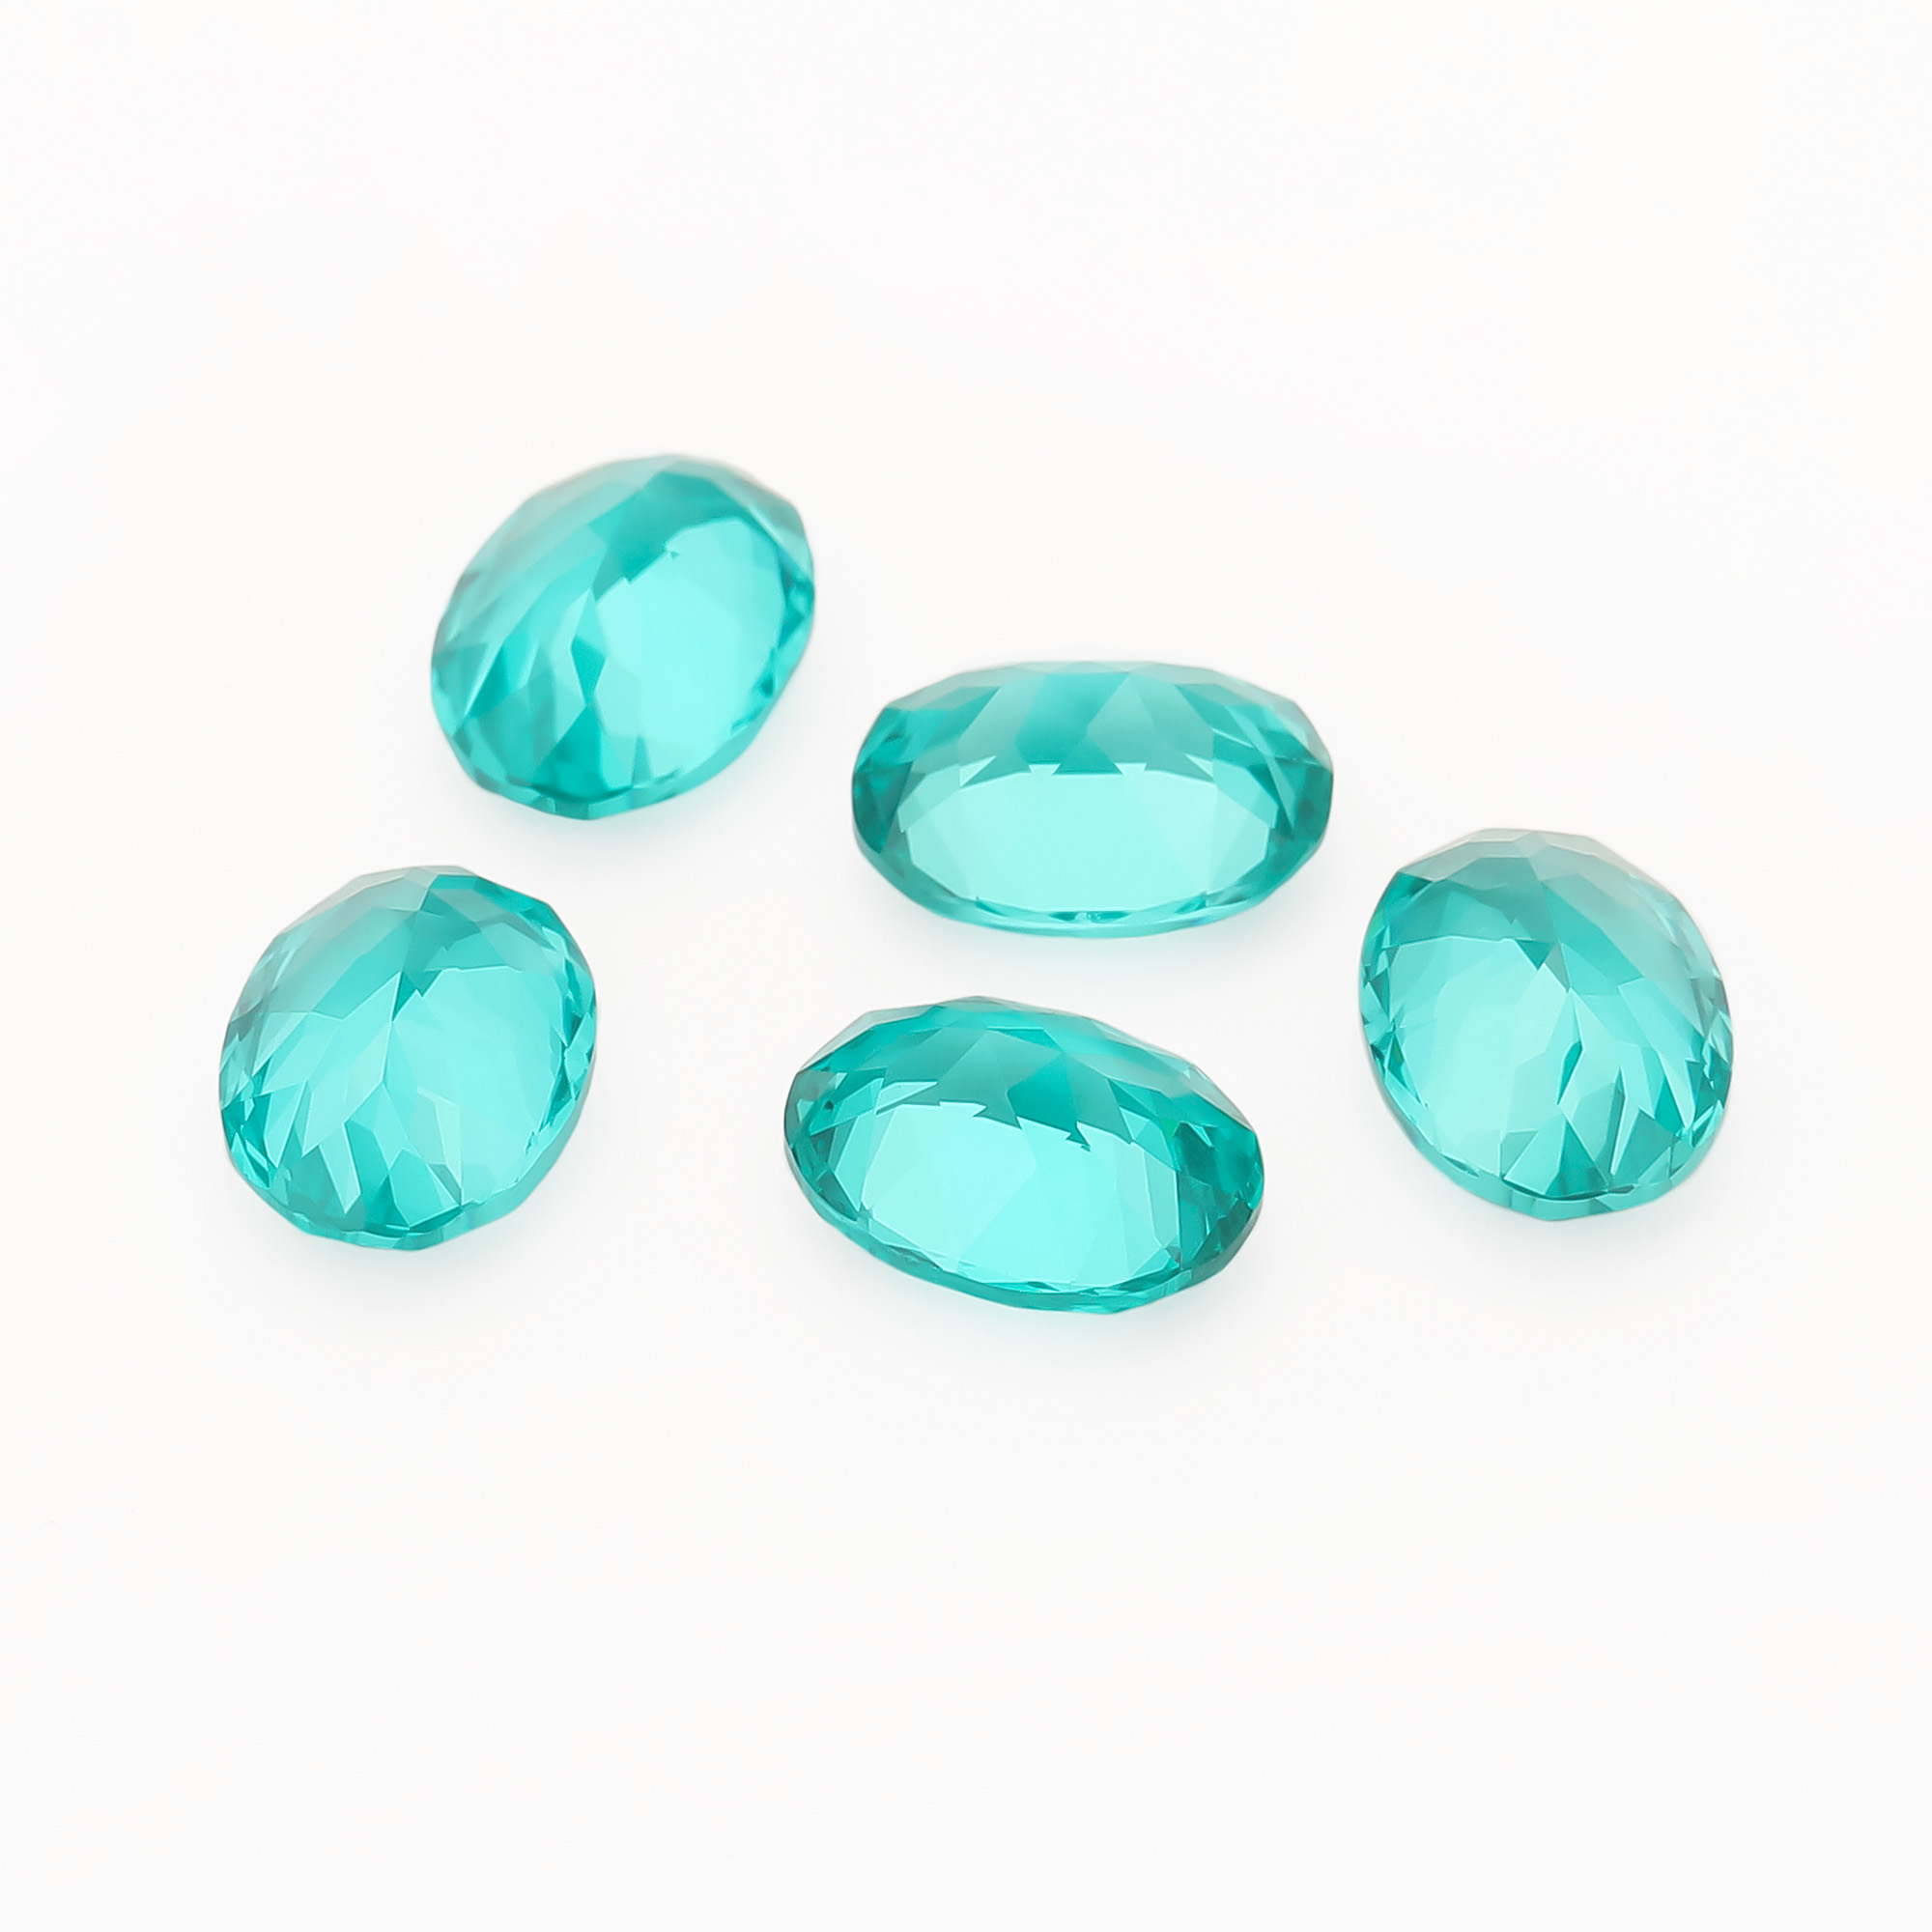 1Pcs 6x8MM Simulated Paraíba Oval Faceted Stone,Green Blue Stone,Unique Gemstone,Loose Stone,DIY Jewelry Supplies 4120146 - Click Image to Close